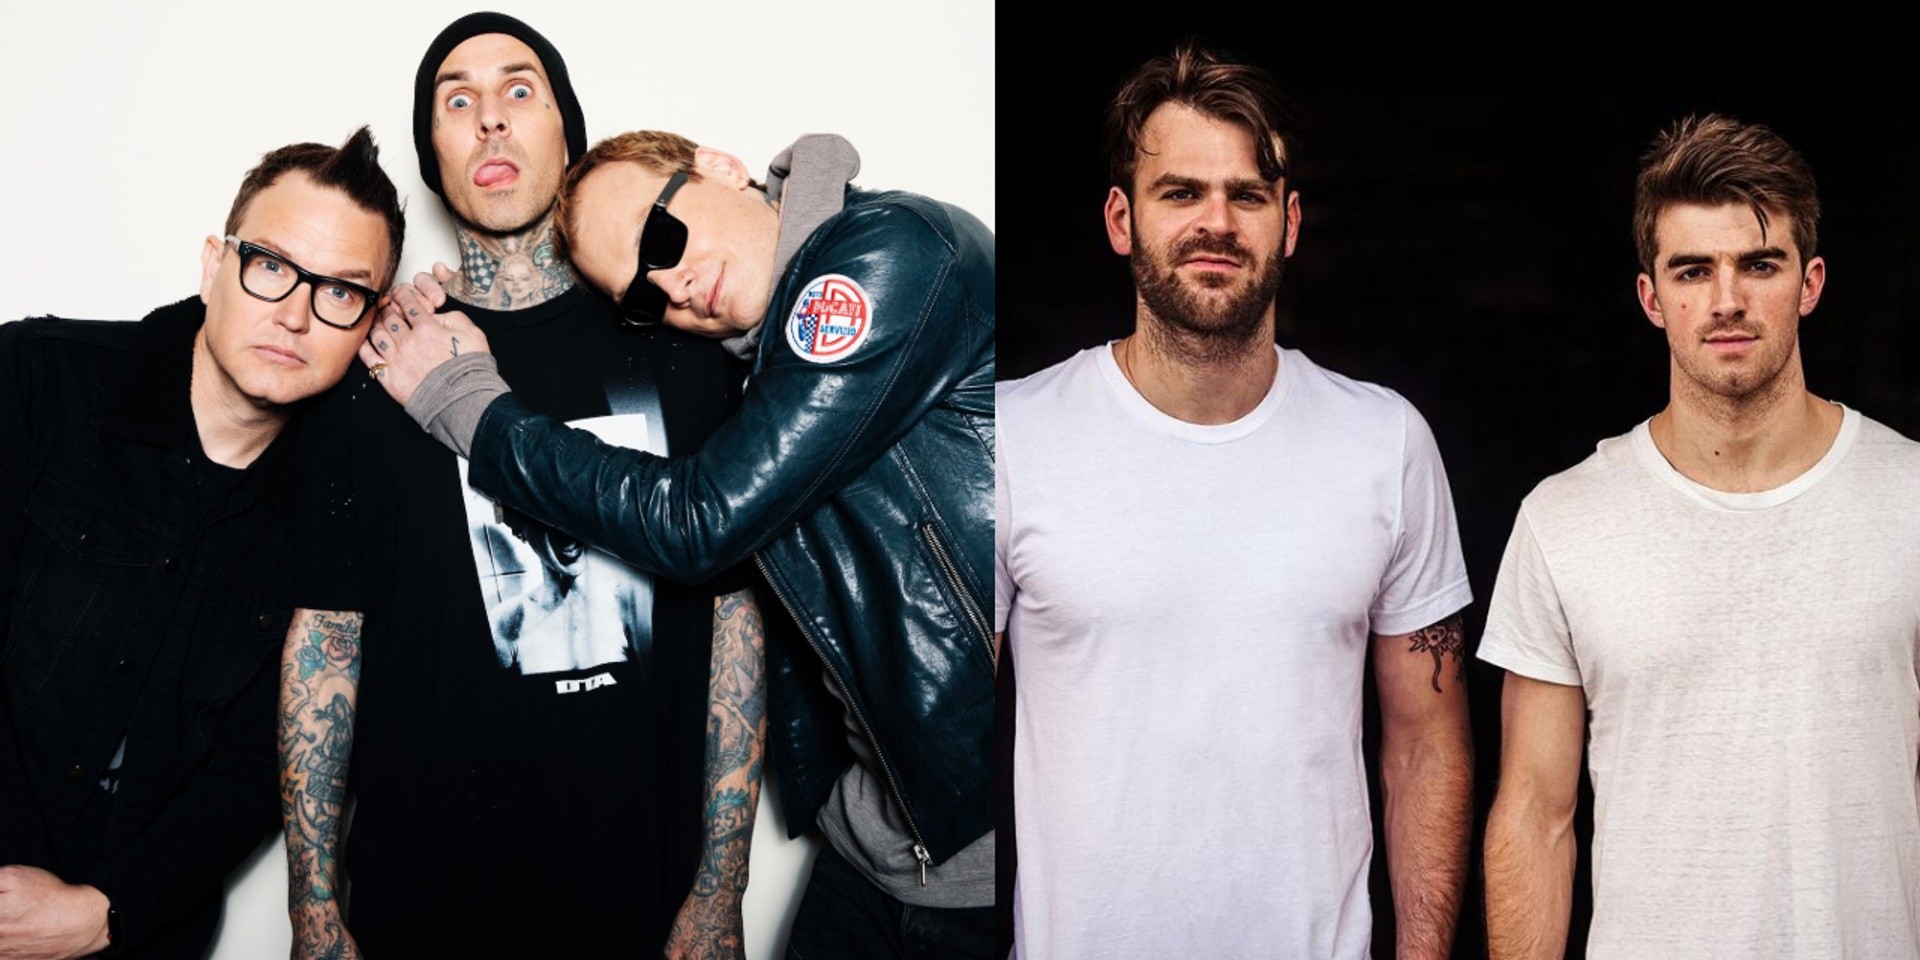 Blink-182 is working on new music... and have a song with The Chainsmokers